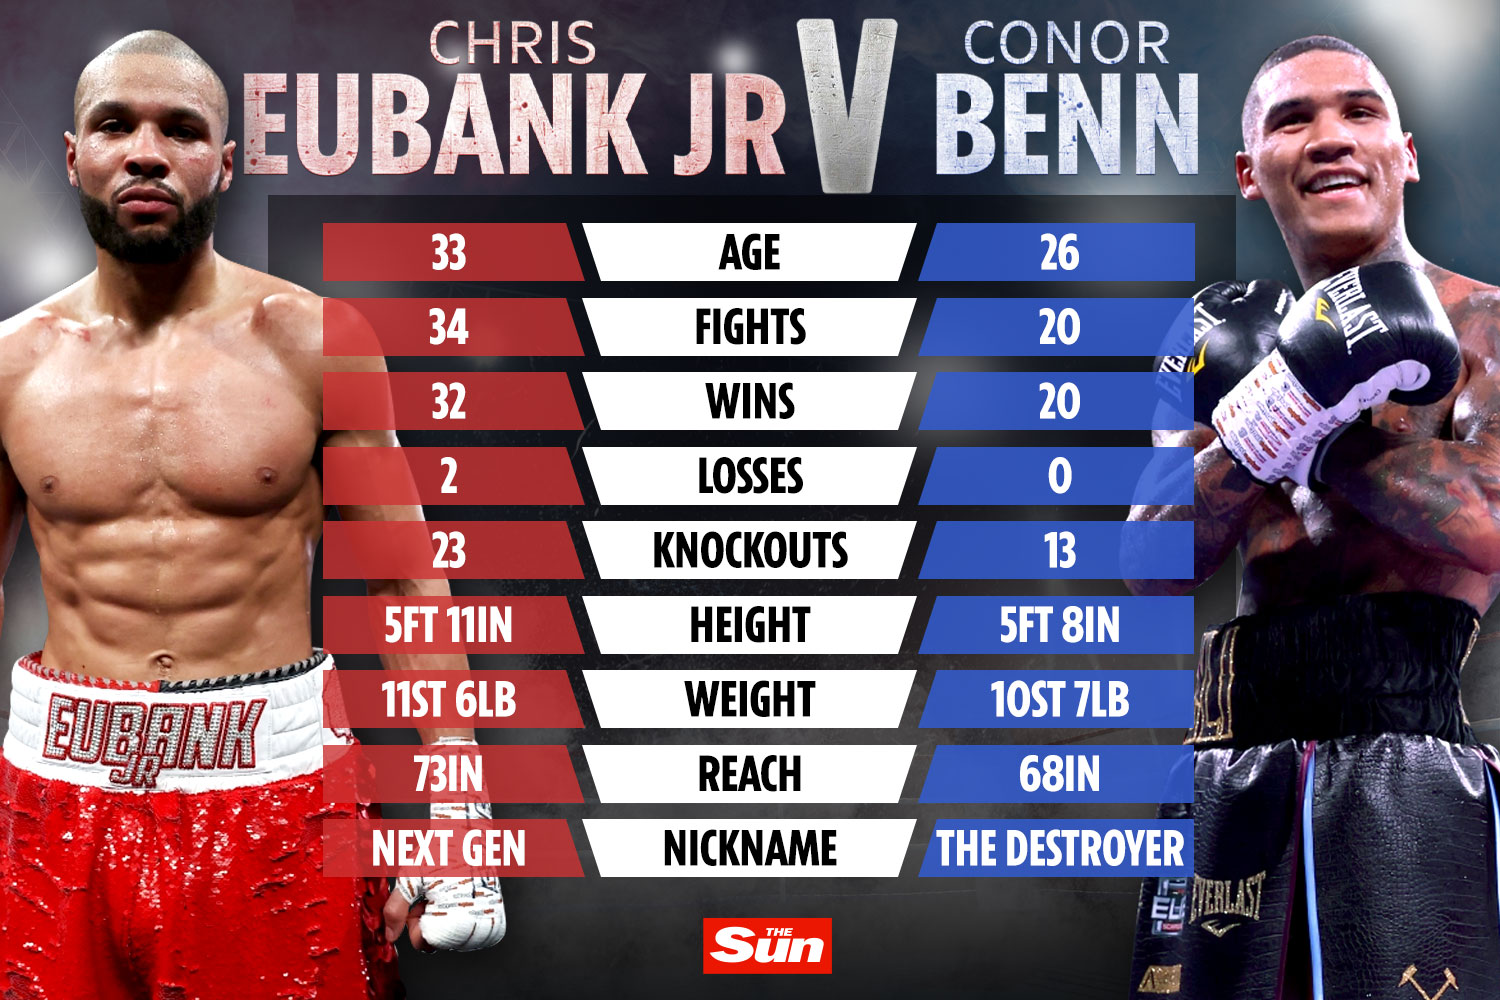 , Chris Eubank Jr tweets response to Conor Benn’s failed drugs test just days before all-British grudge fight